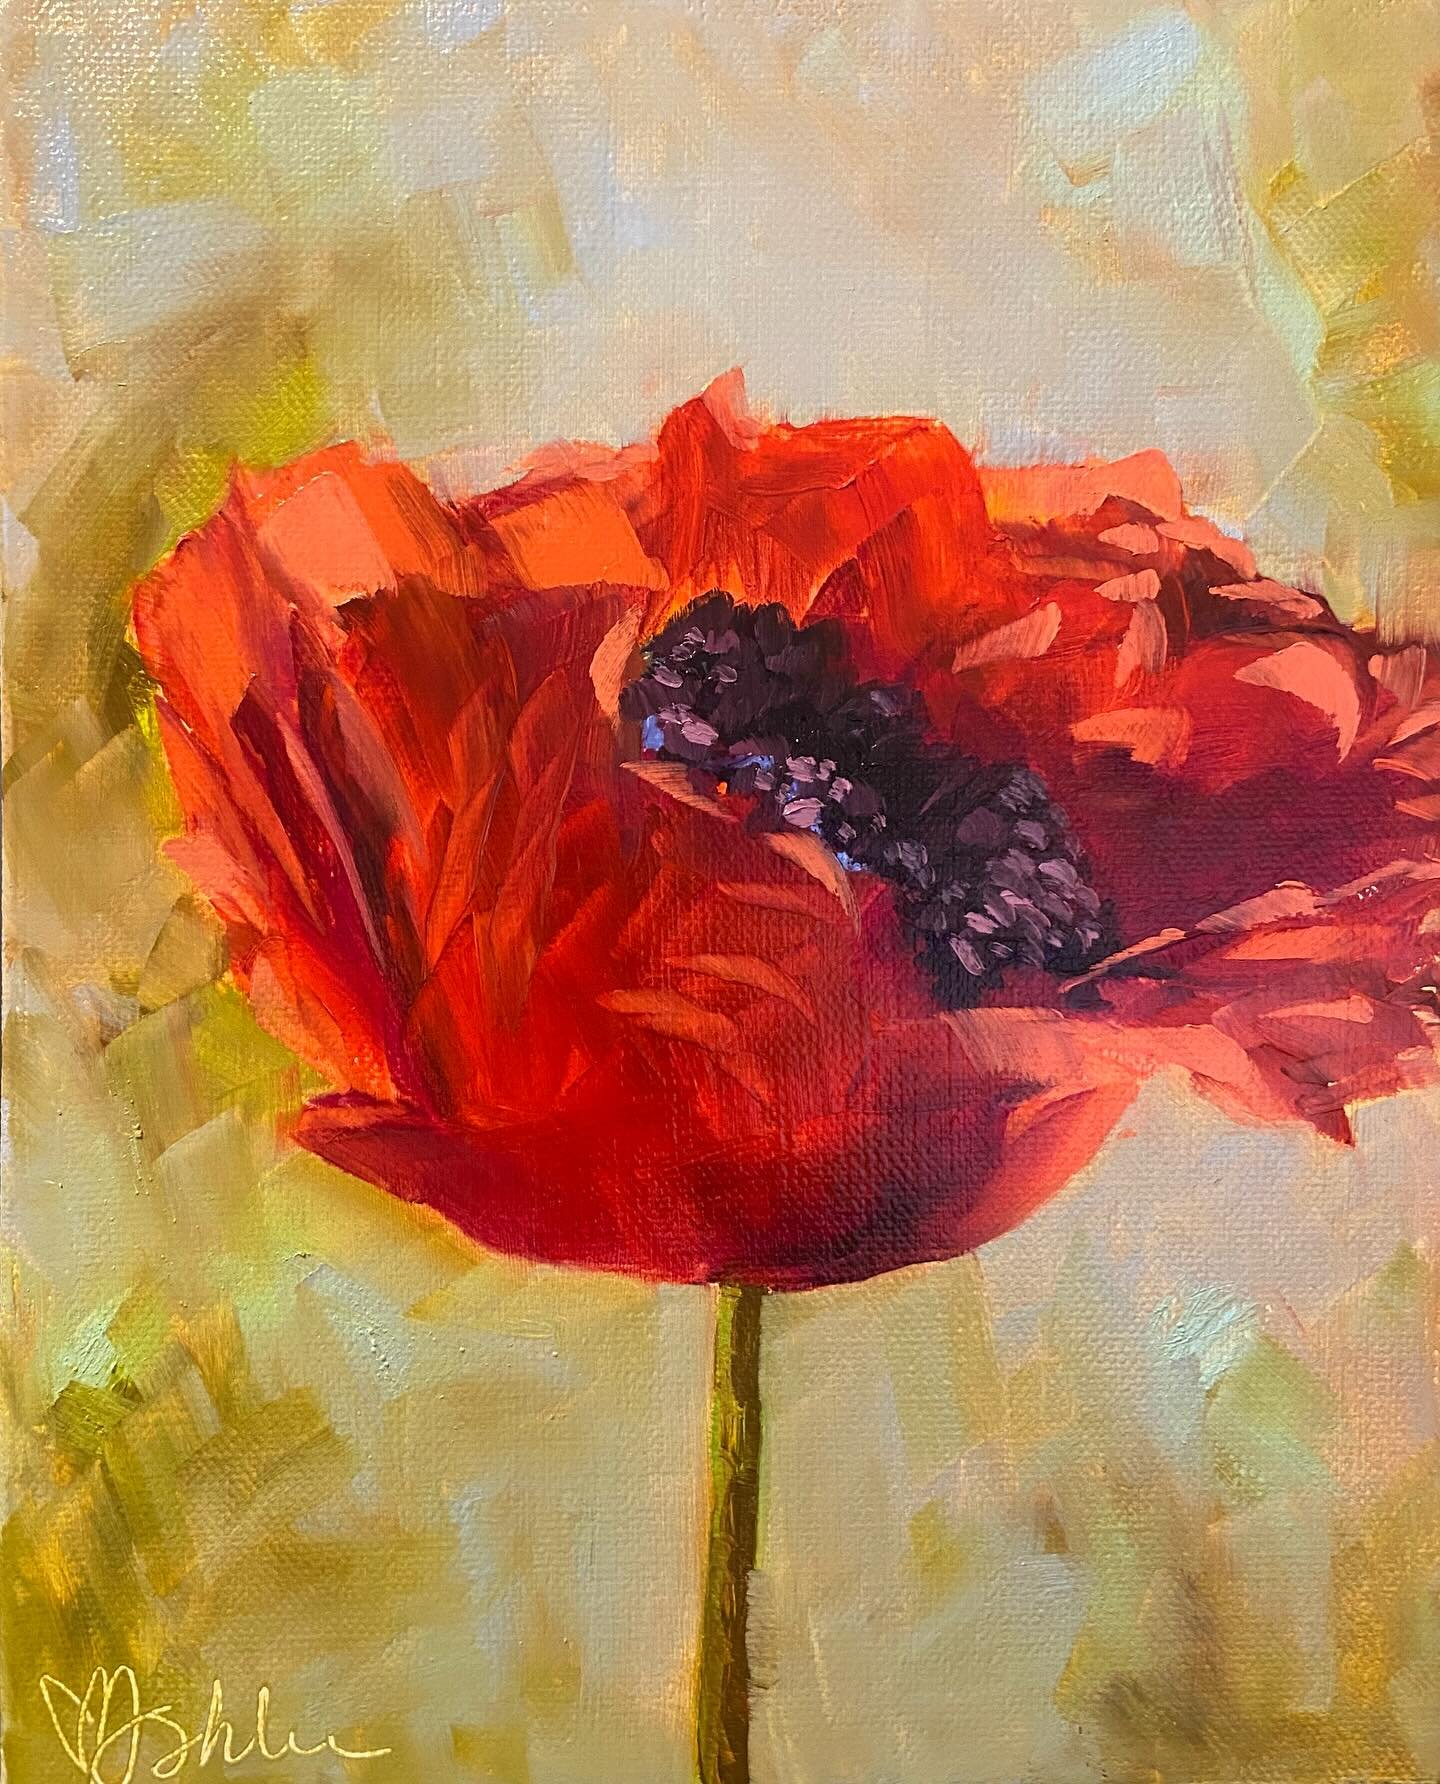 After A Long Day
#oilpainting #poppy #dailyartist #gardenartist #floralart #oilpaint #oilpaintings